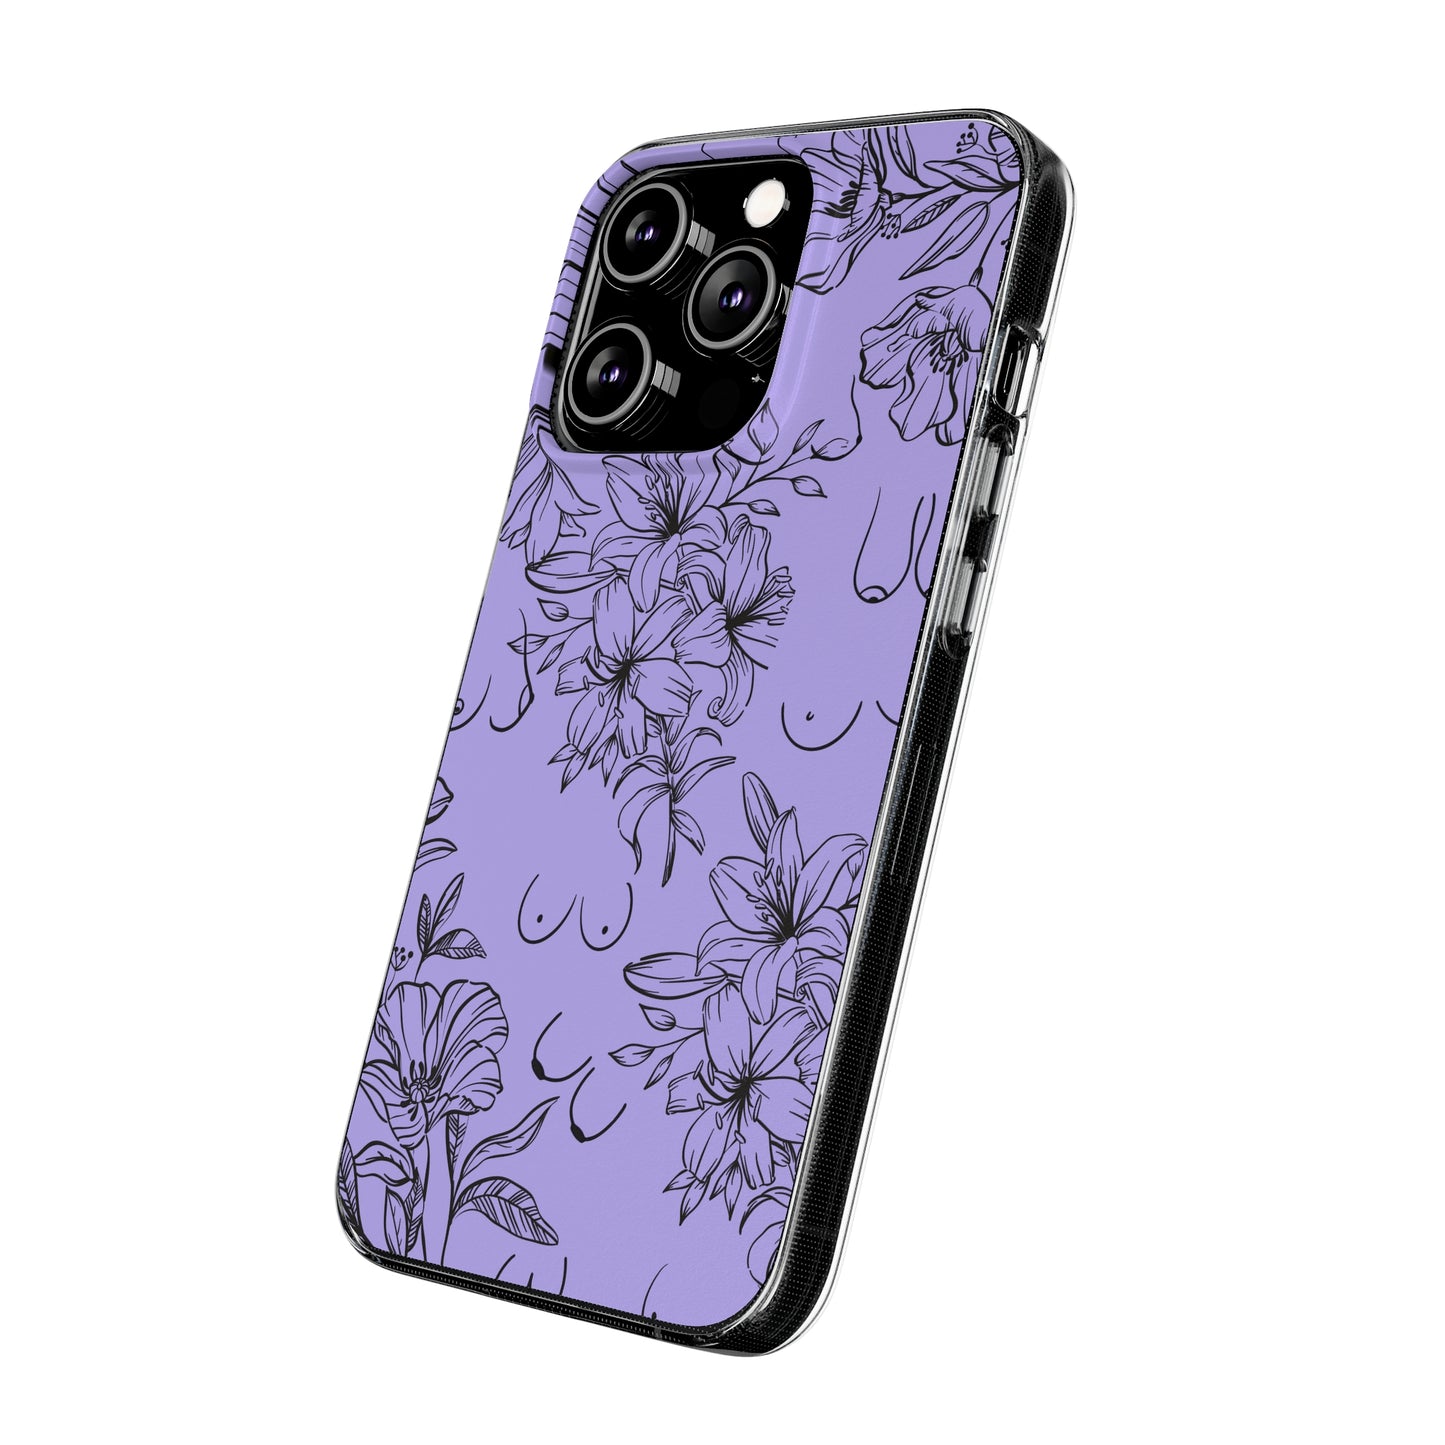 "Blossom Beauties" Soft iPhone Case